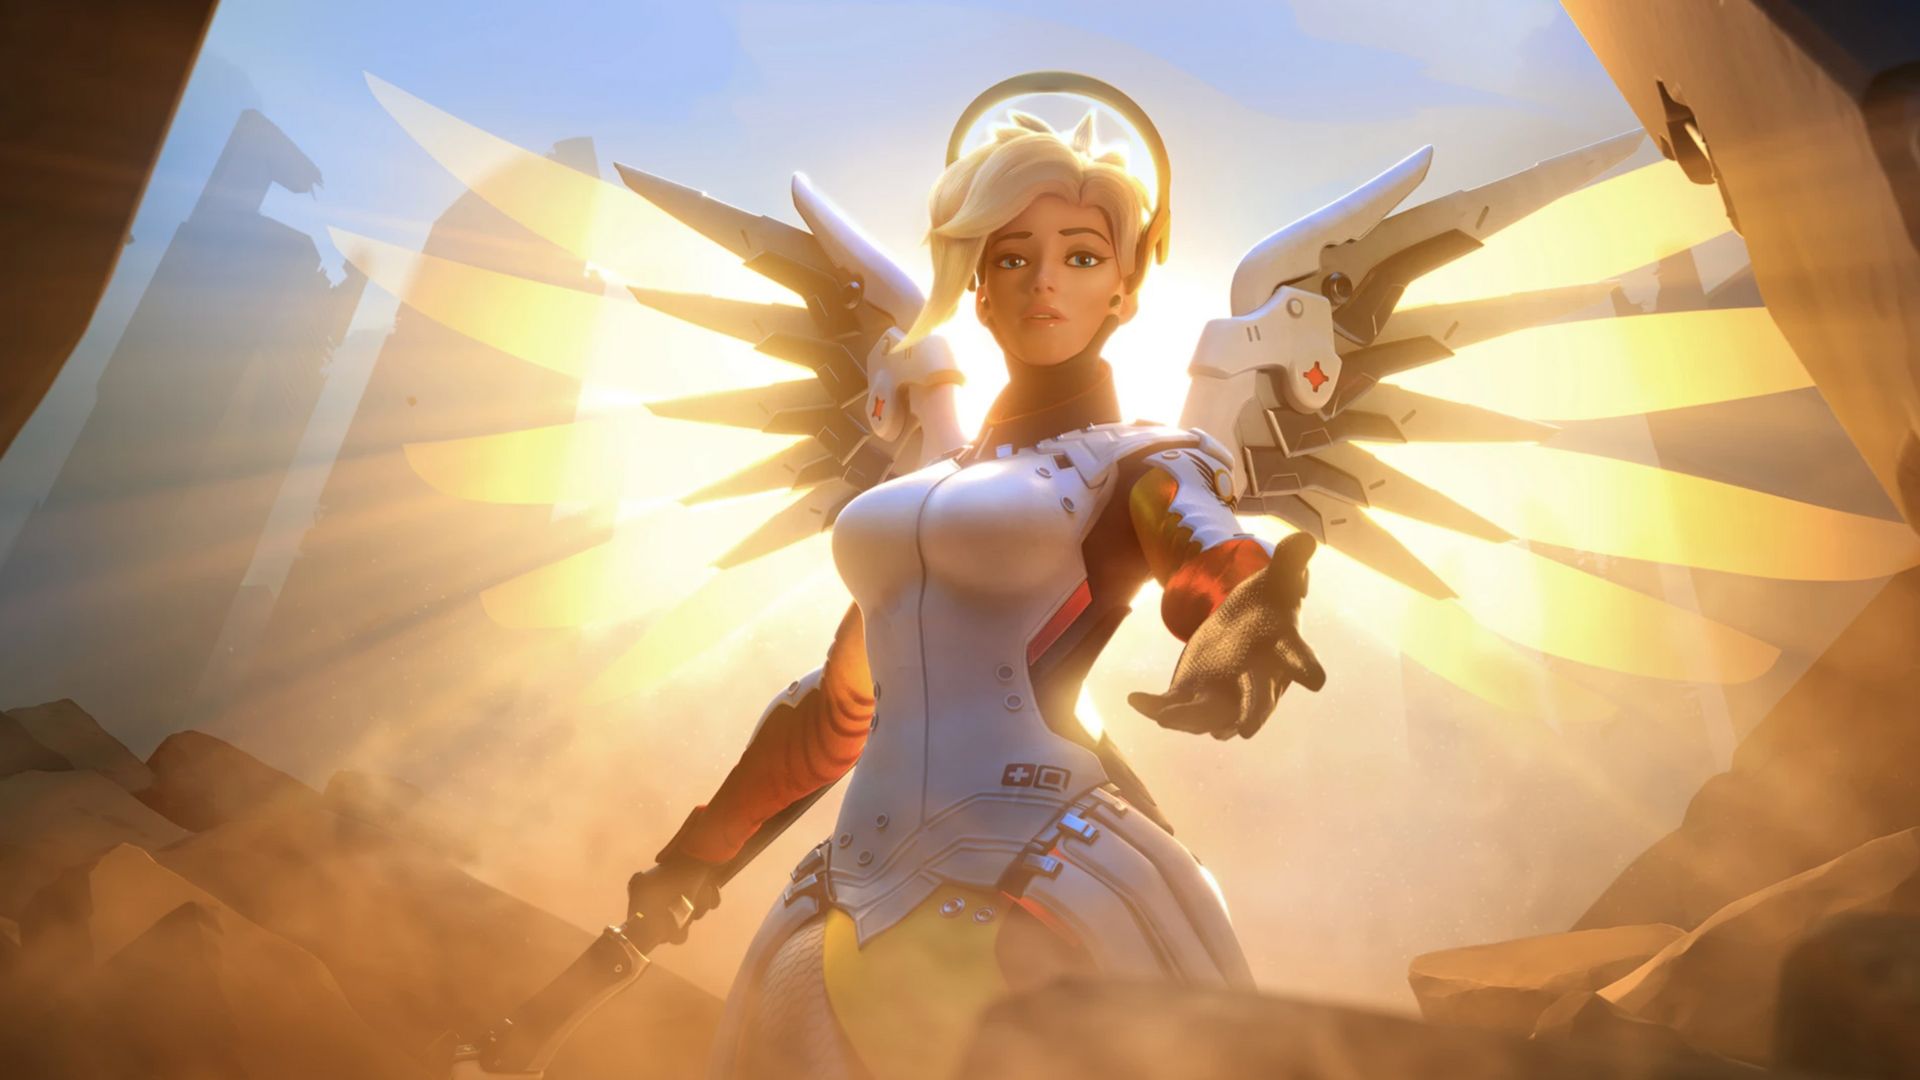 Overwatch’s Mercy says robust ladies don’t must be males